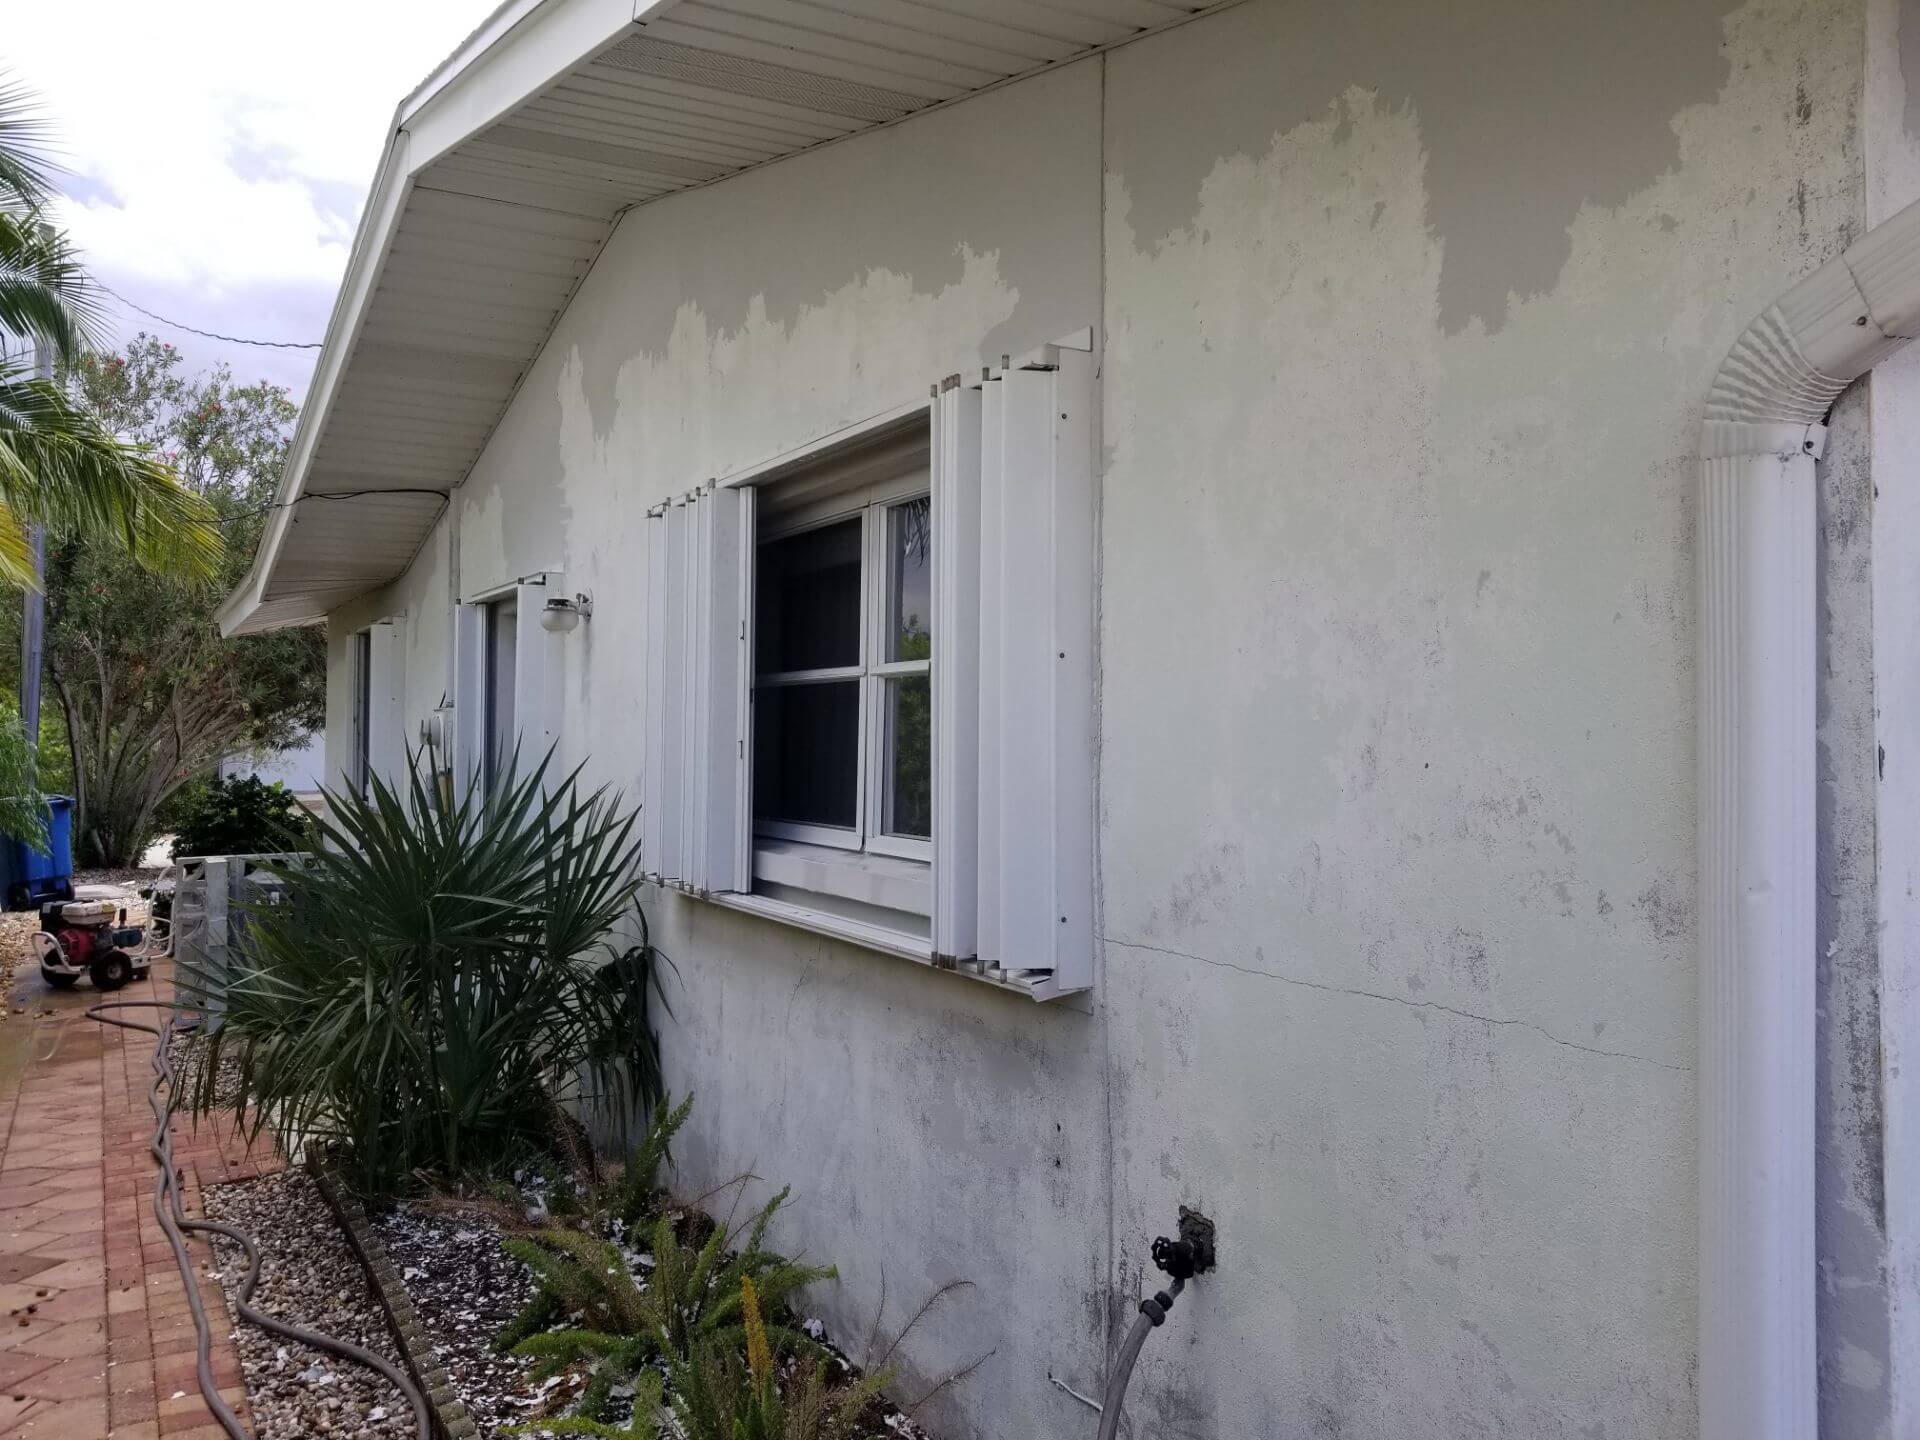 the side of the house as peeling paint 